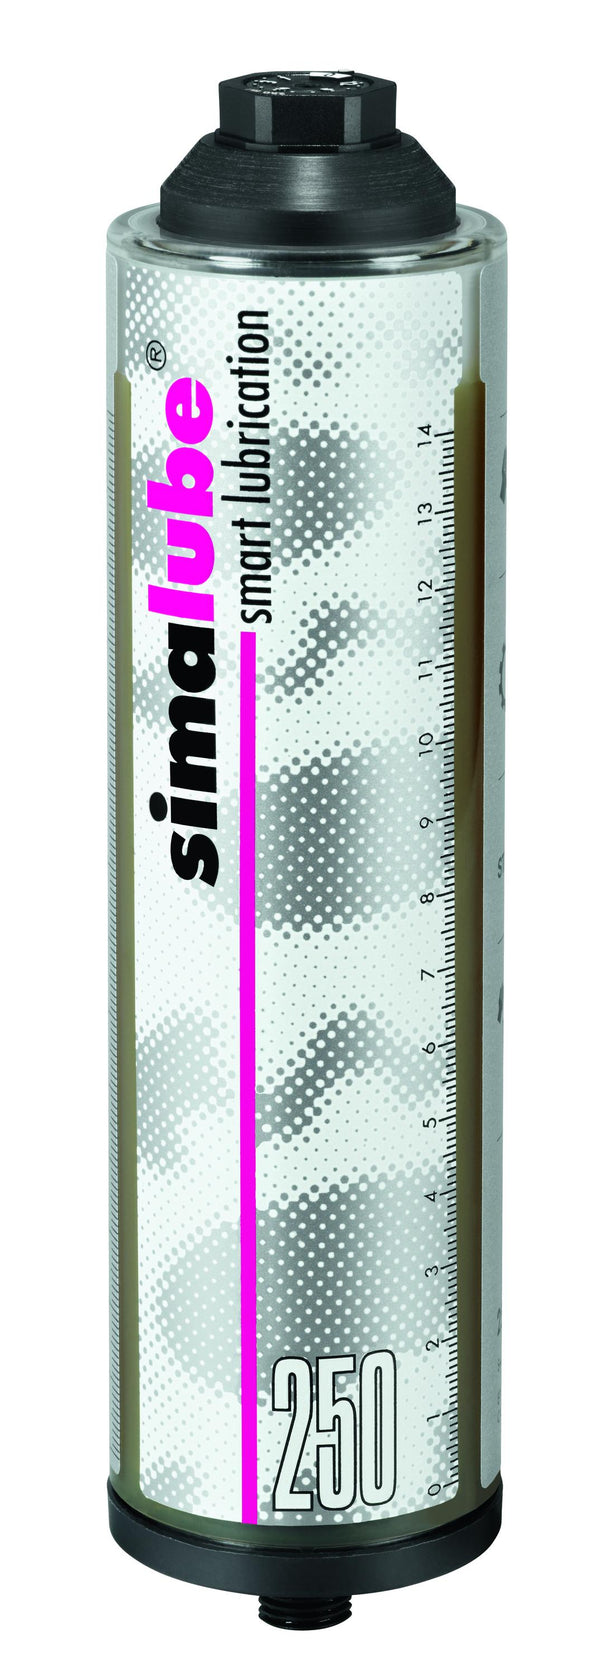 Simalube lubrication cartridge filled with food oil 250ml